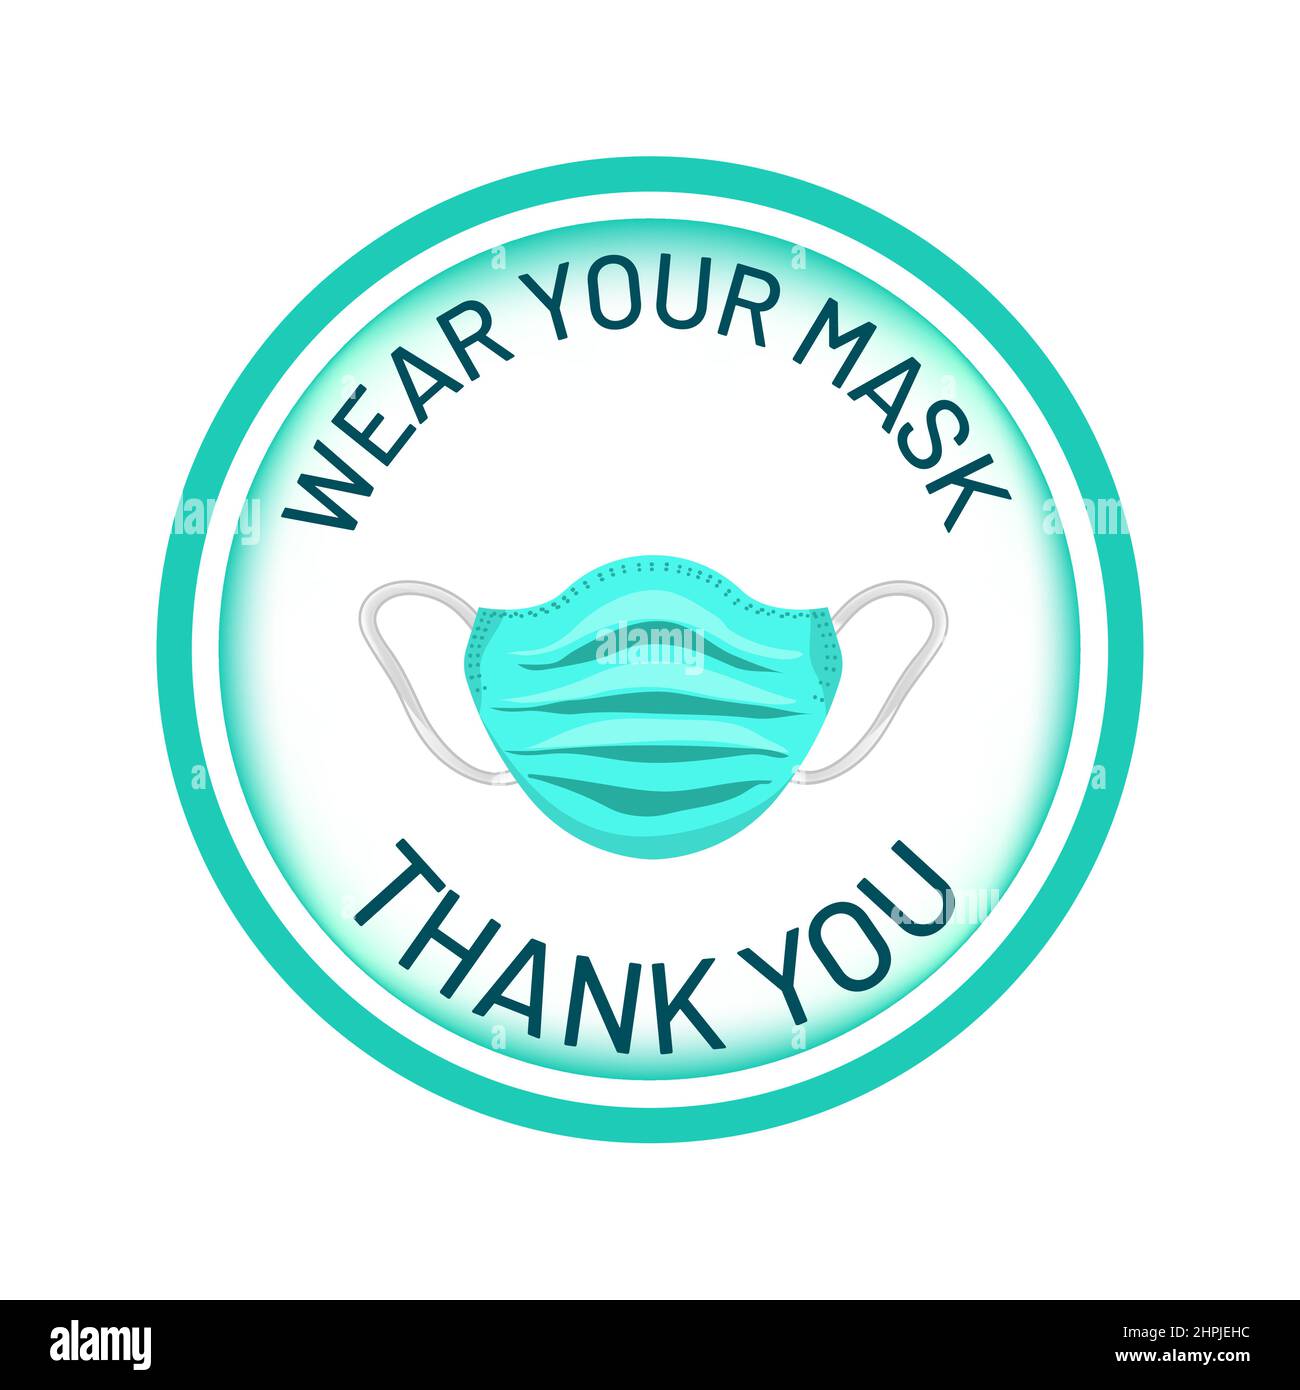 Wear Your Mask, Thank You, welcome notice at the doorstep, reminder sign to use facial mask and protect yourself and others, advice, instruction Stock Vector